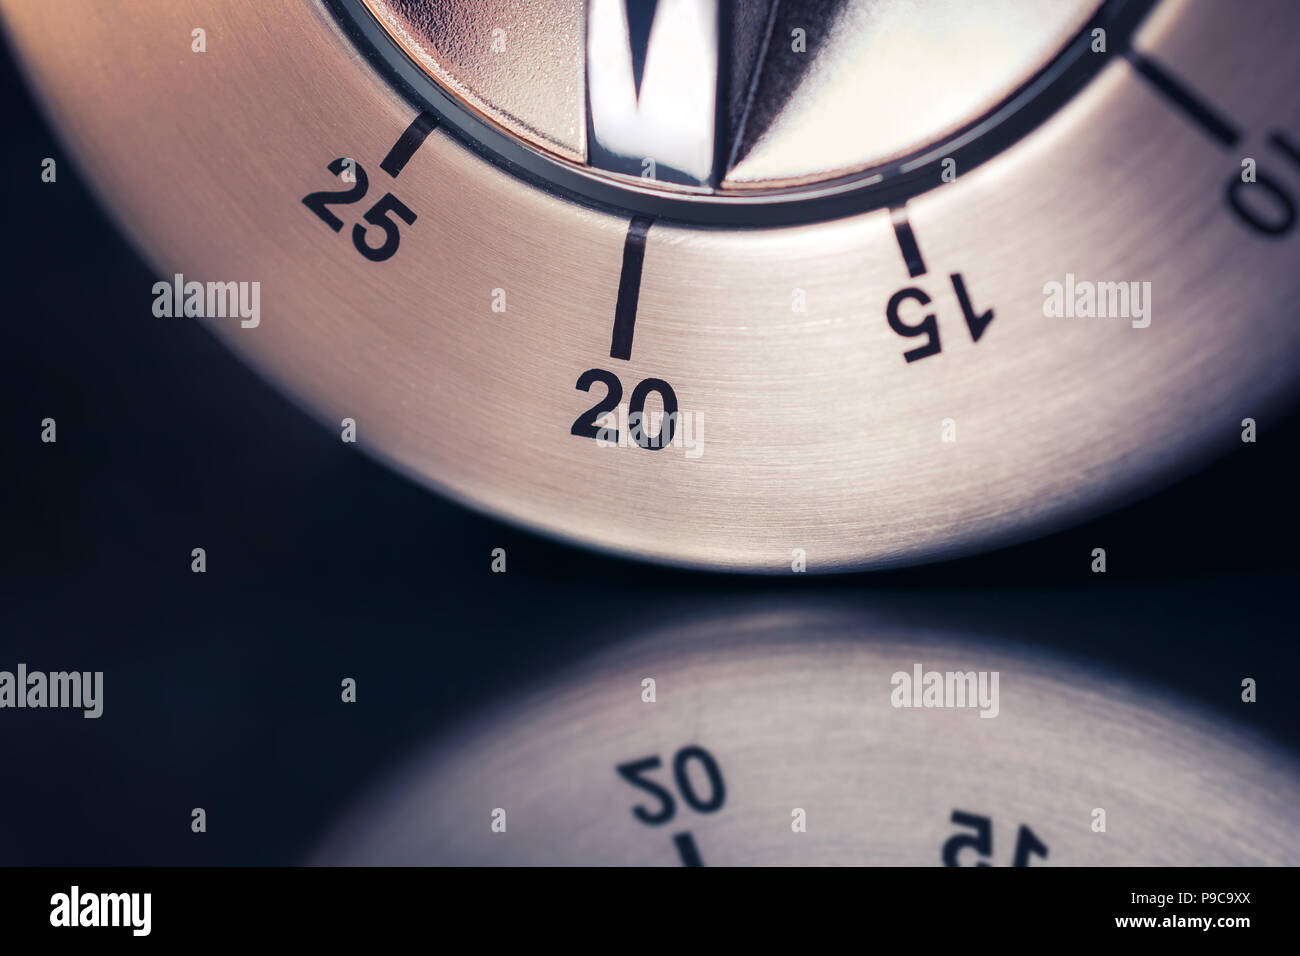 https://c8.alamy.com/comp/P9C9XX/20-minutes-macro-of-an-analog-chrome-kitchen-timer-with-dark-background-and-reflection-P9C9XX.jpg